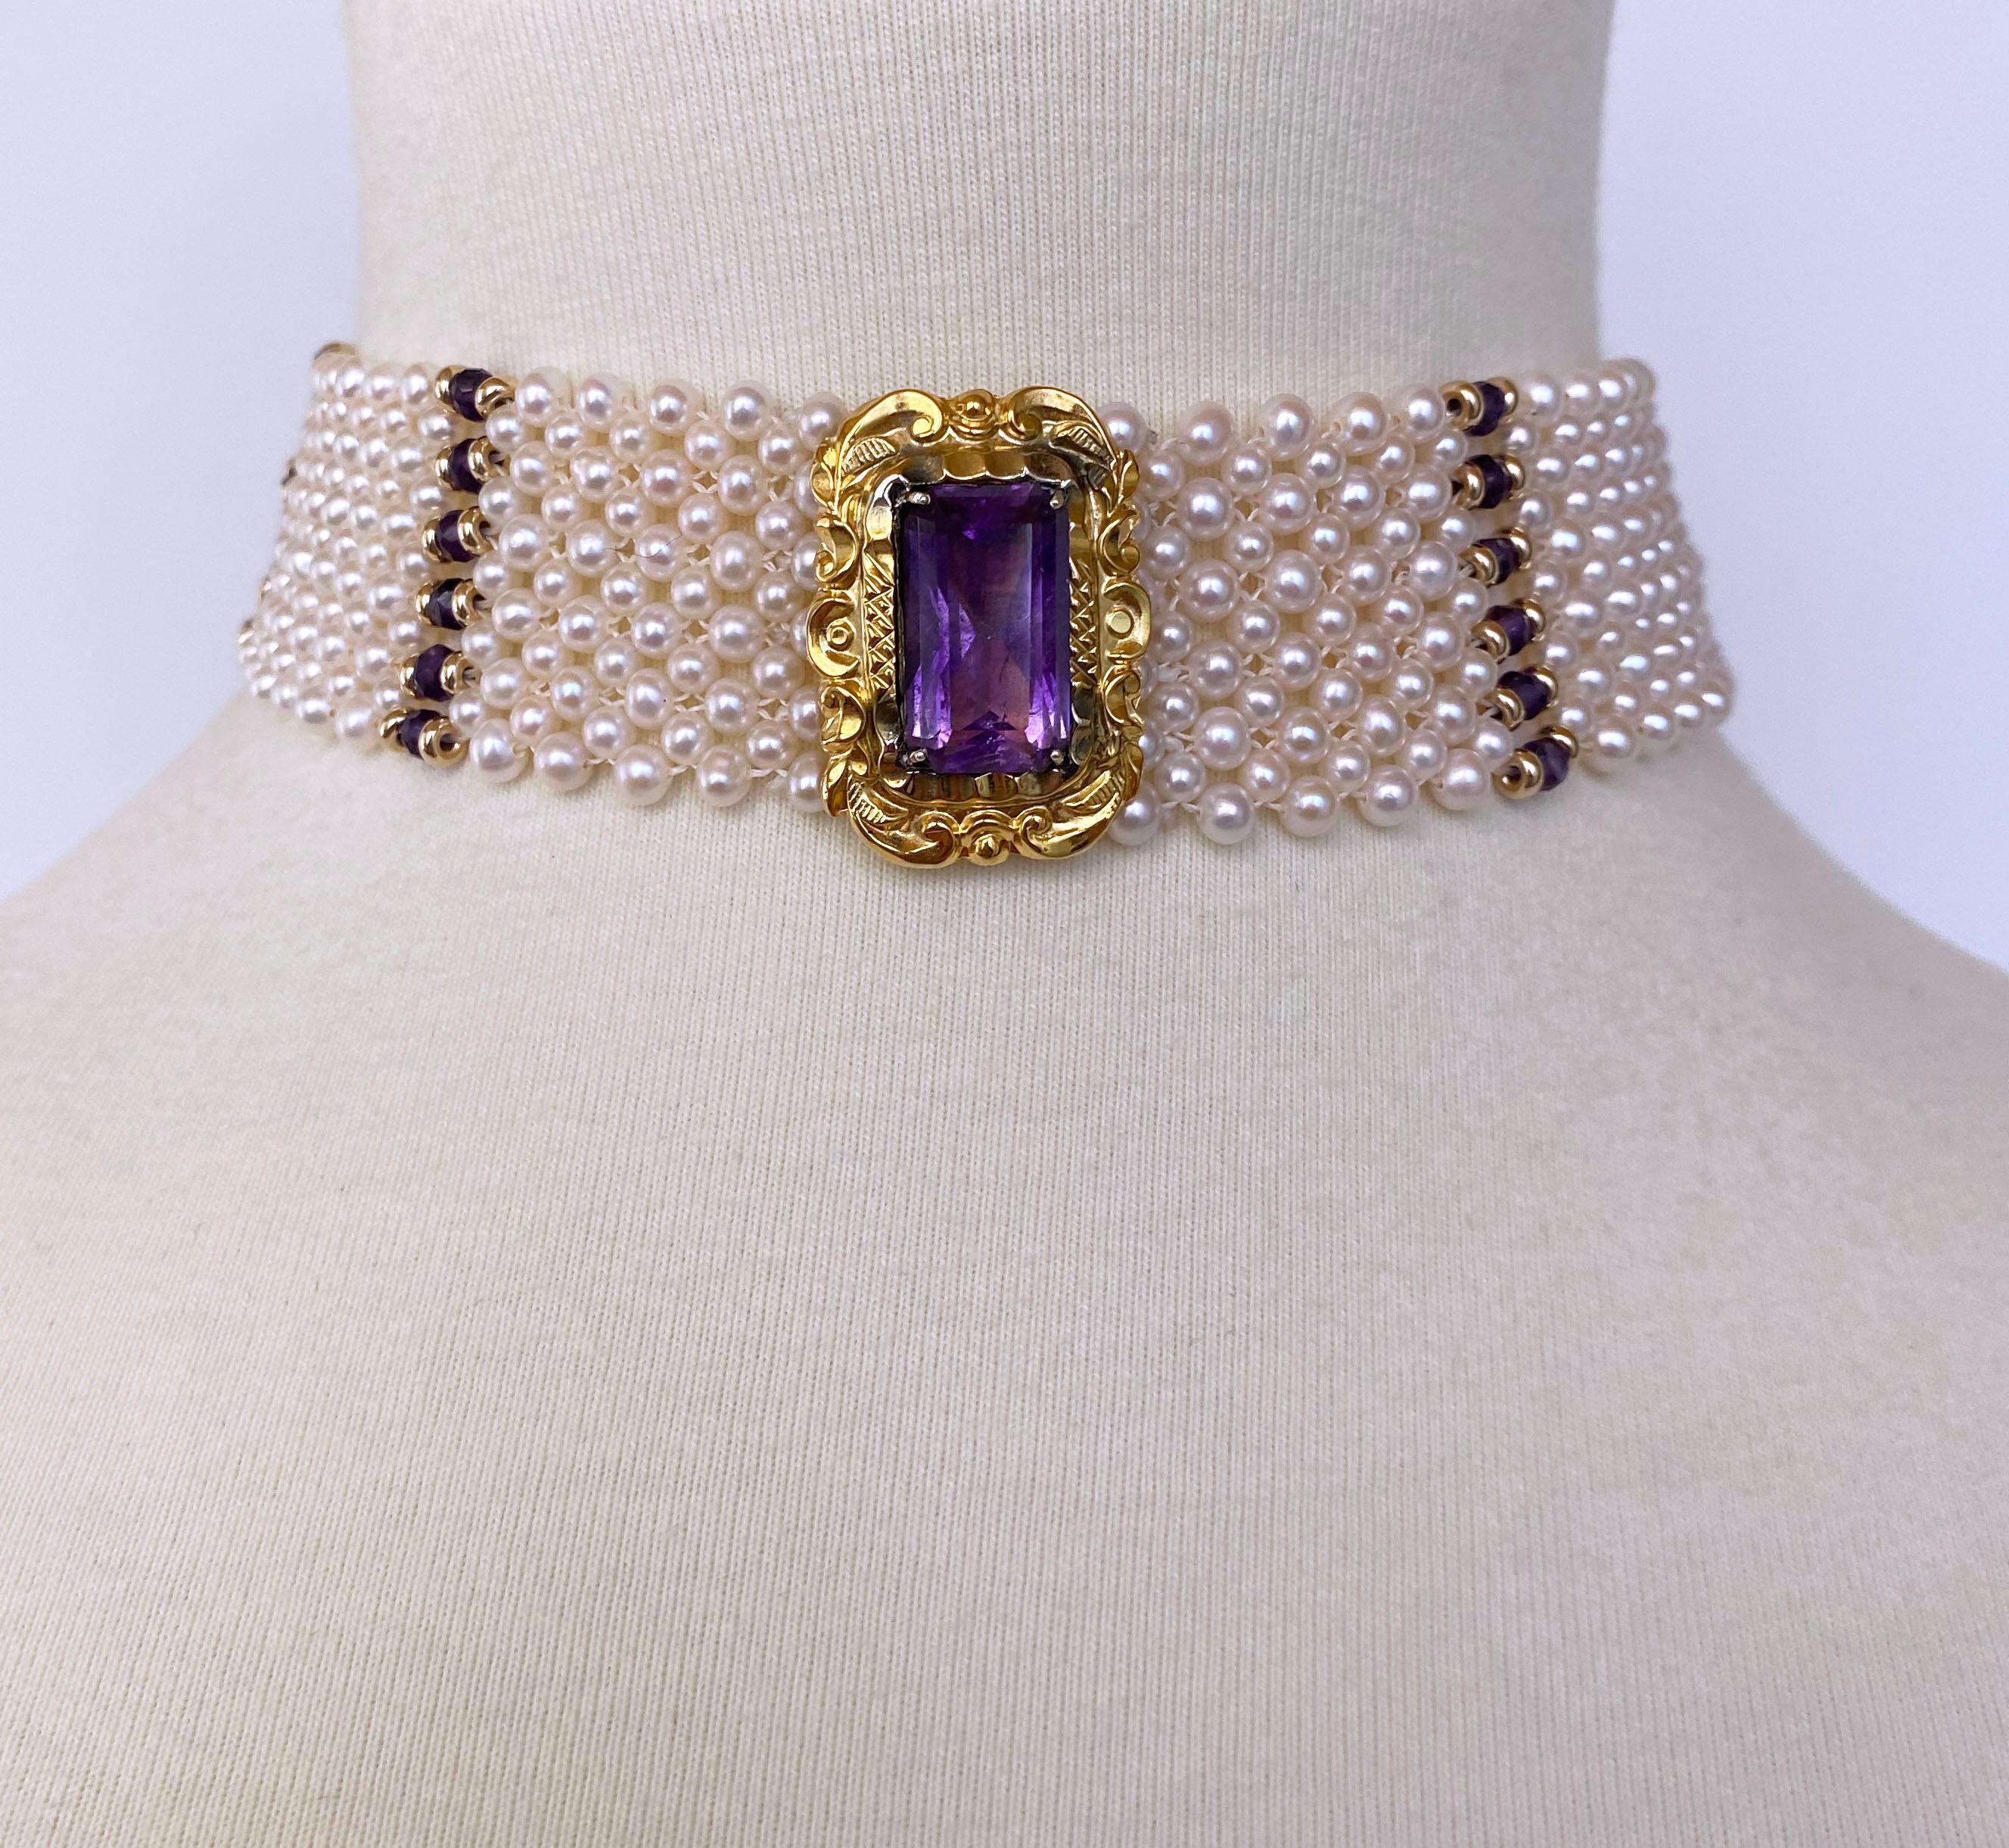 Marina J. Pearl, Amethyst and Vintage Centerpiece Choker with 14k Yellow Gold 2